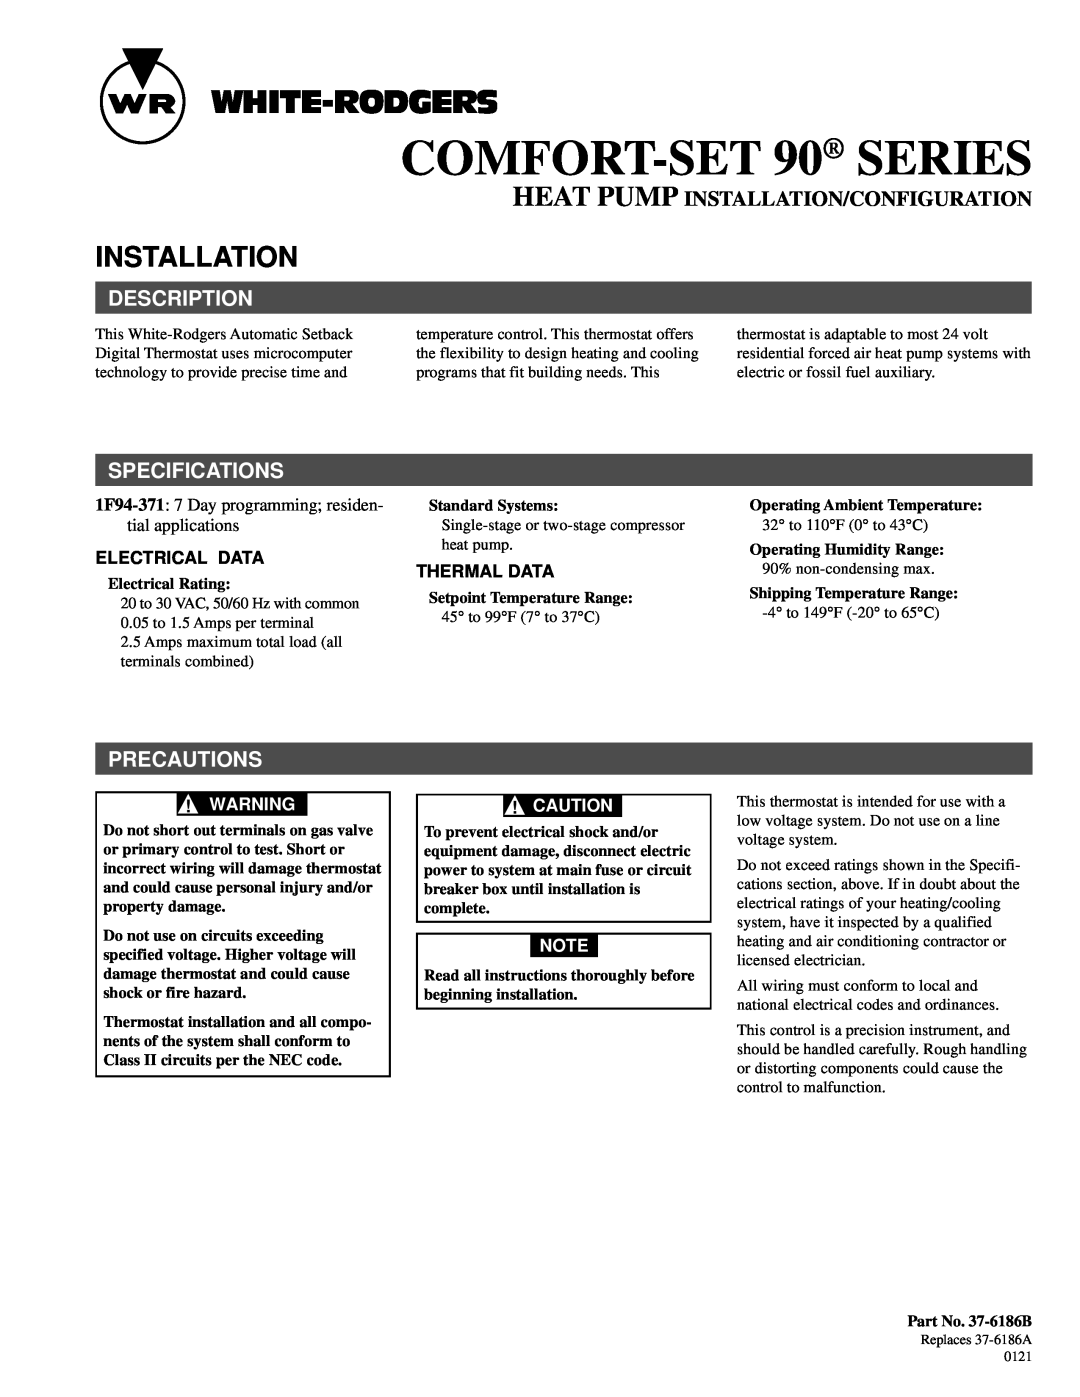 White Rodgers 37-6186B specifications Installation, Description, Specifications, Precautions, Electrical Data 